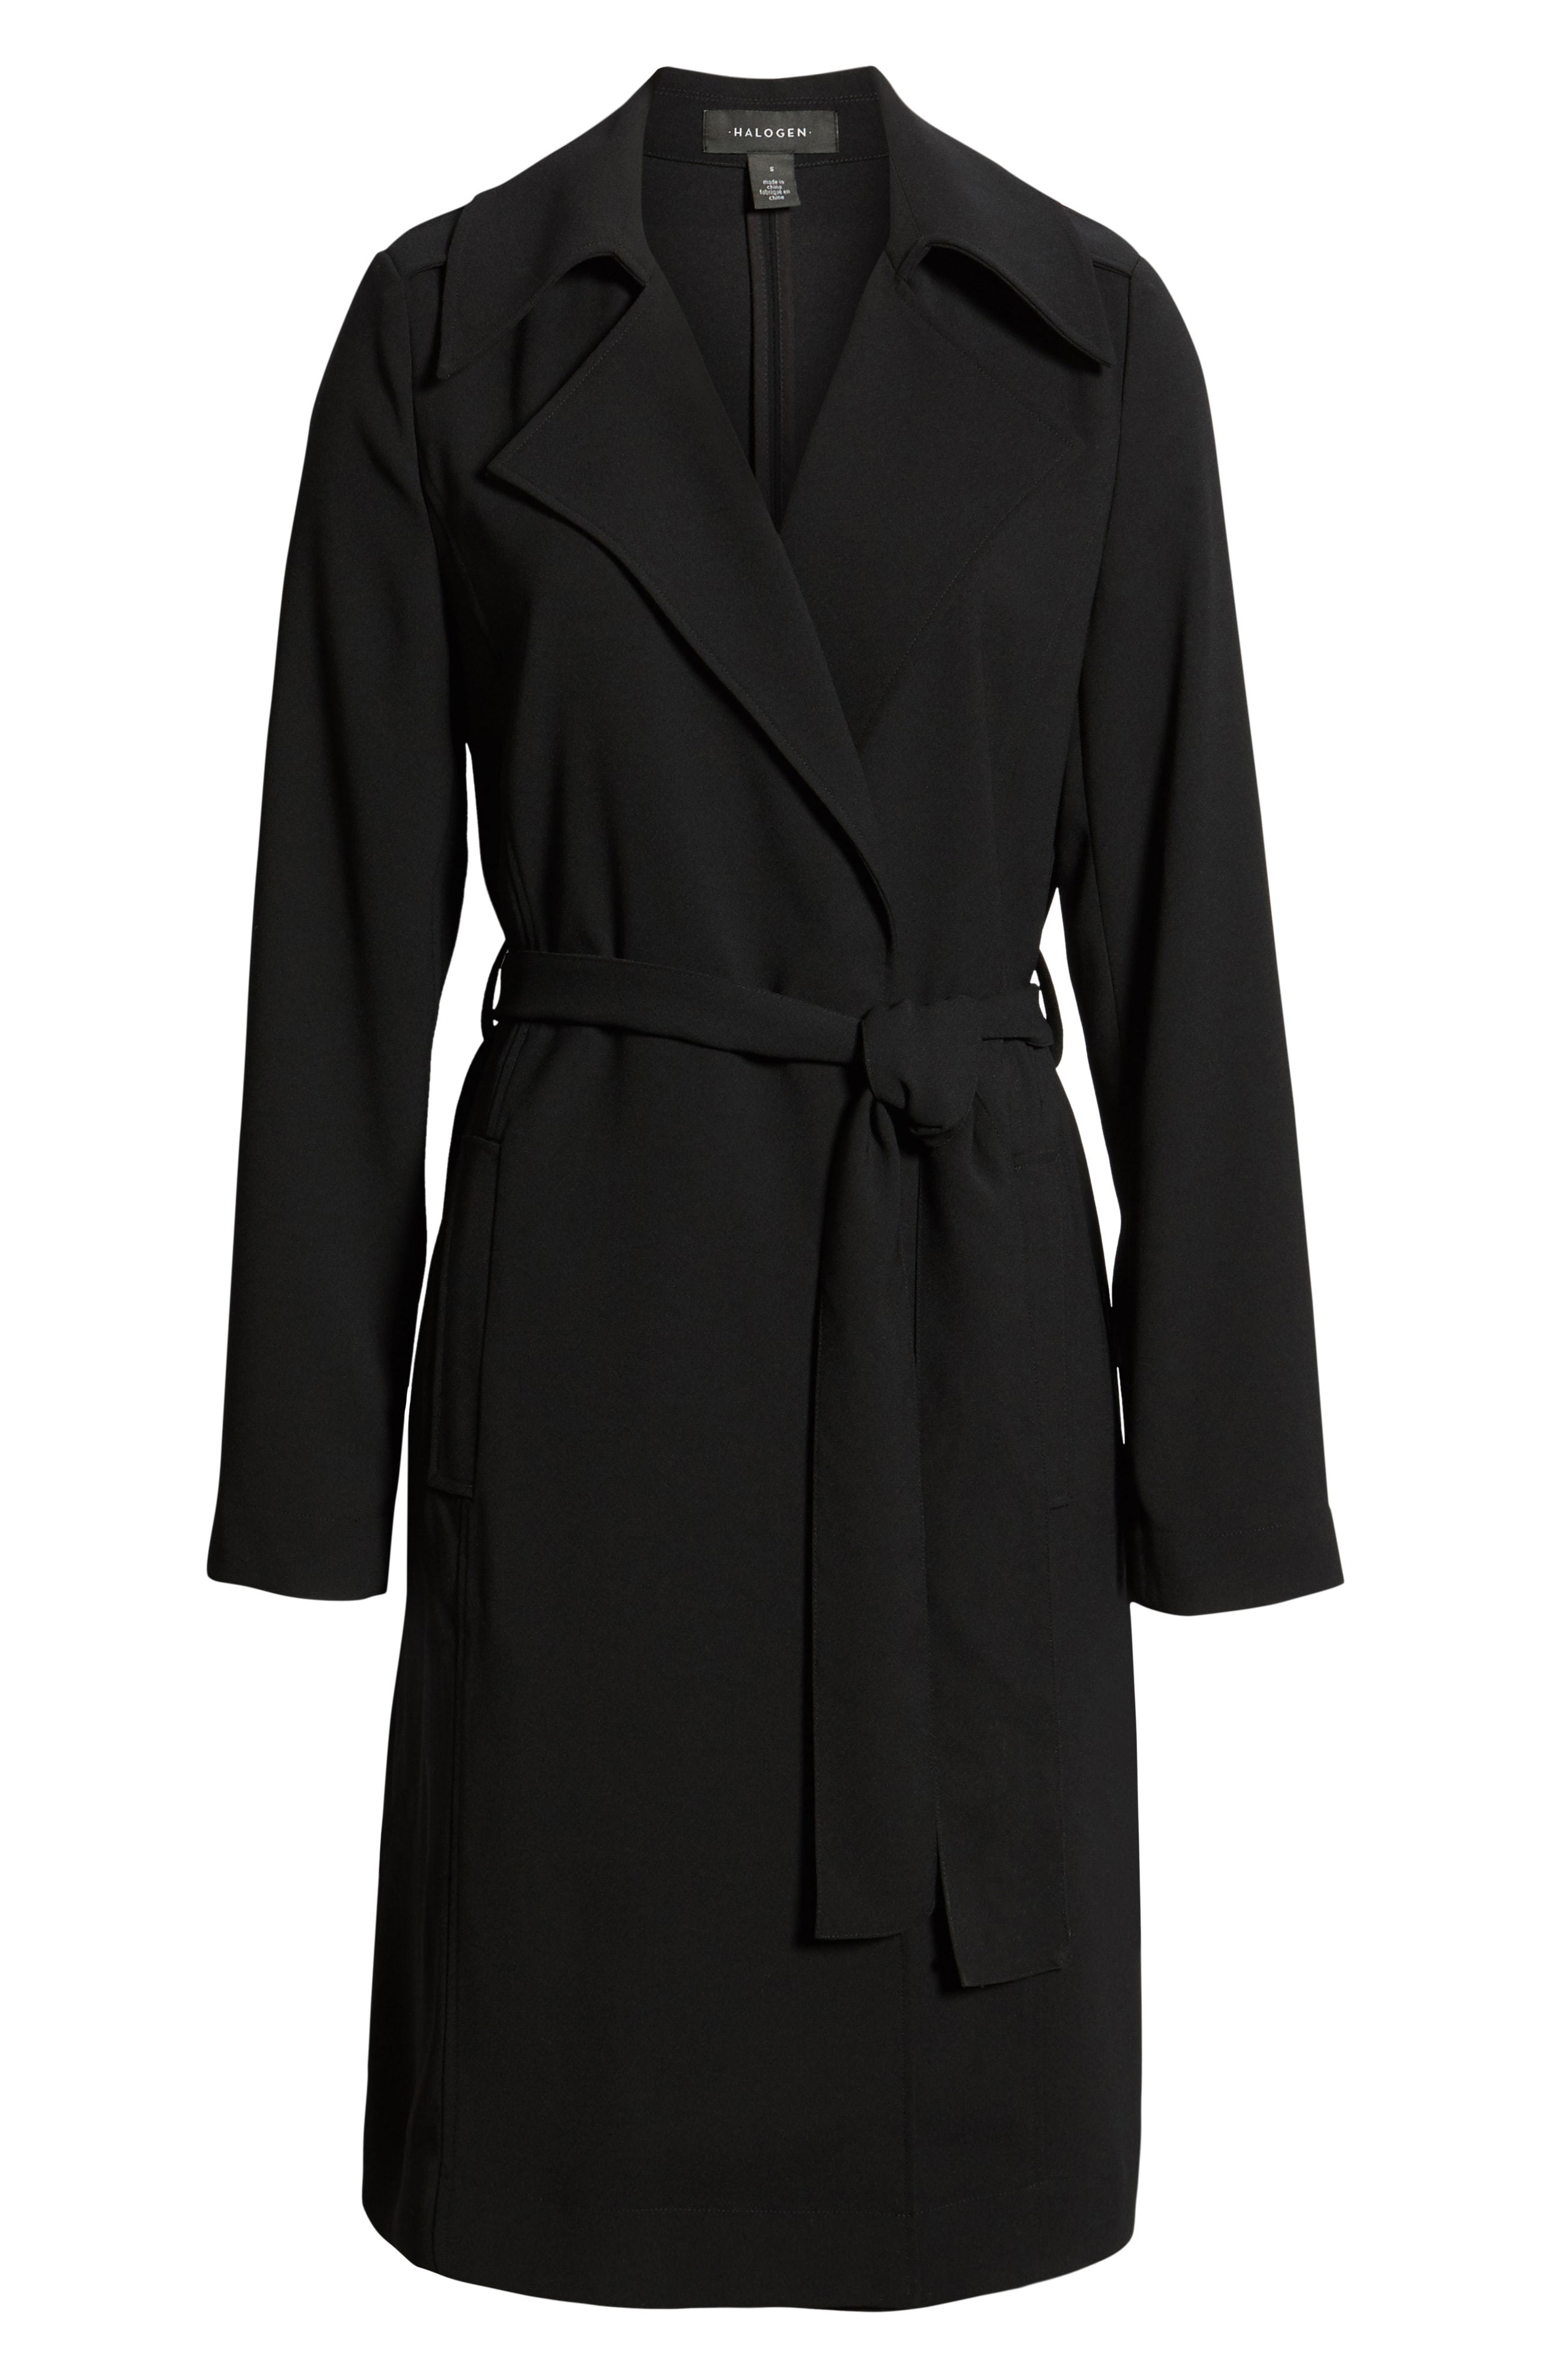 Black trench coat for winters – thefashiontamer.com